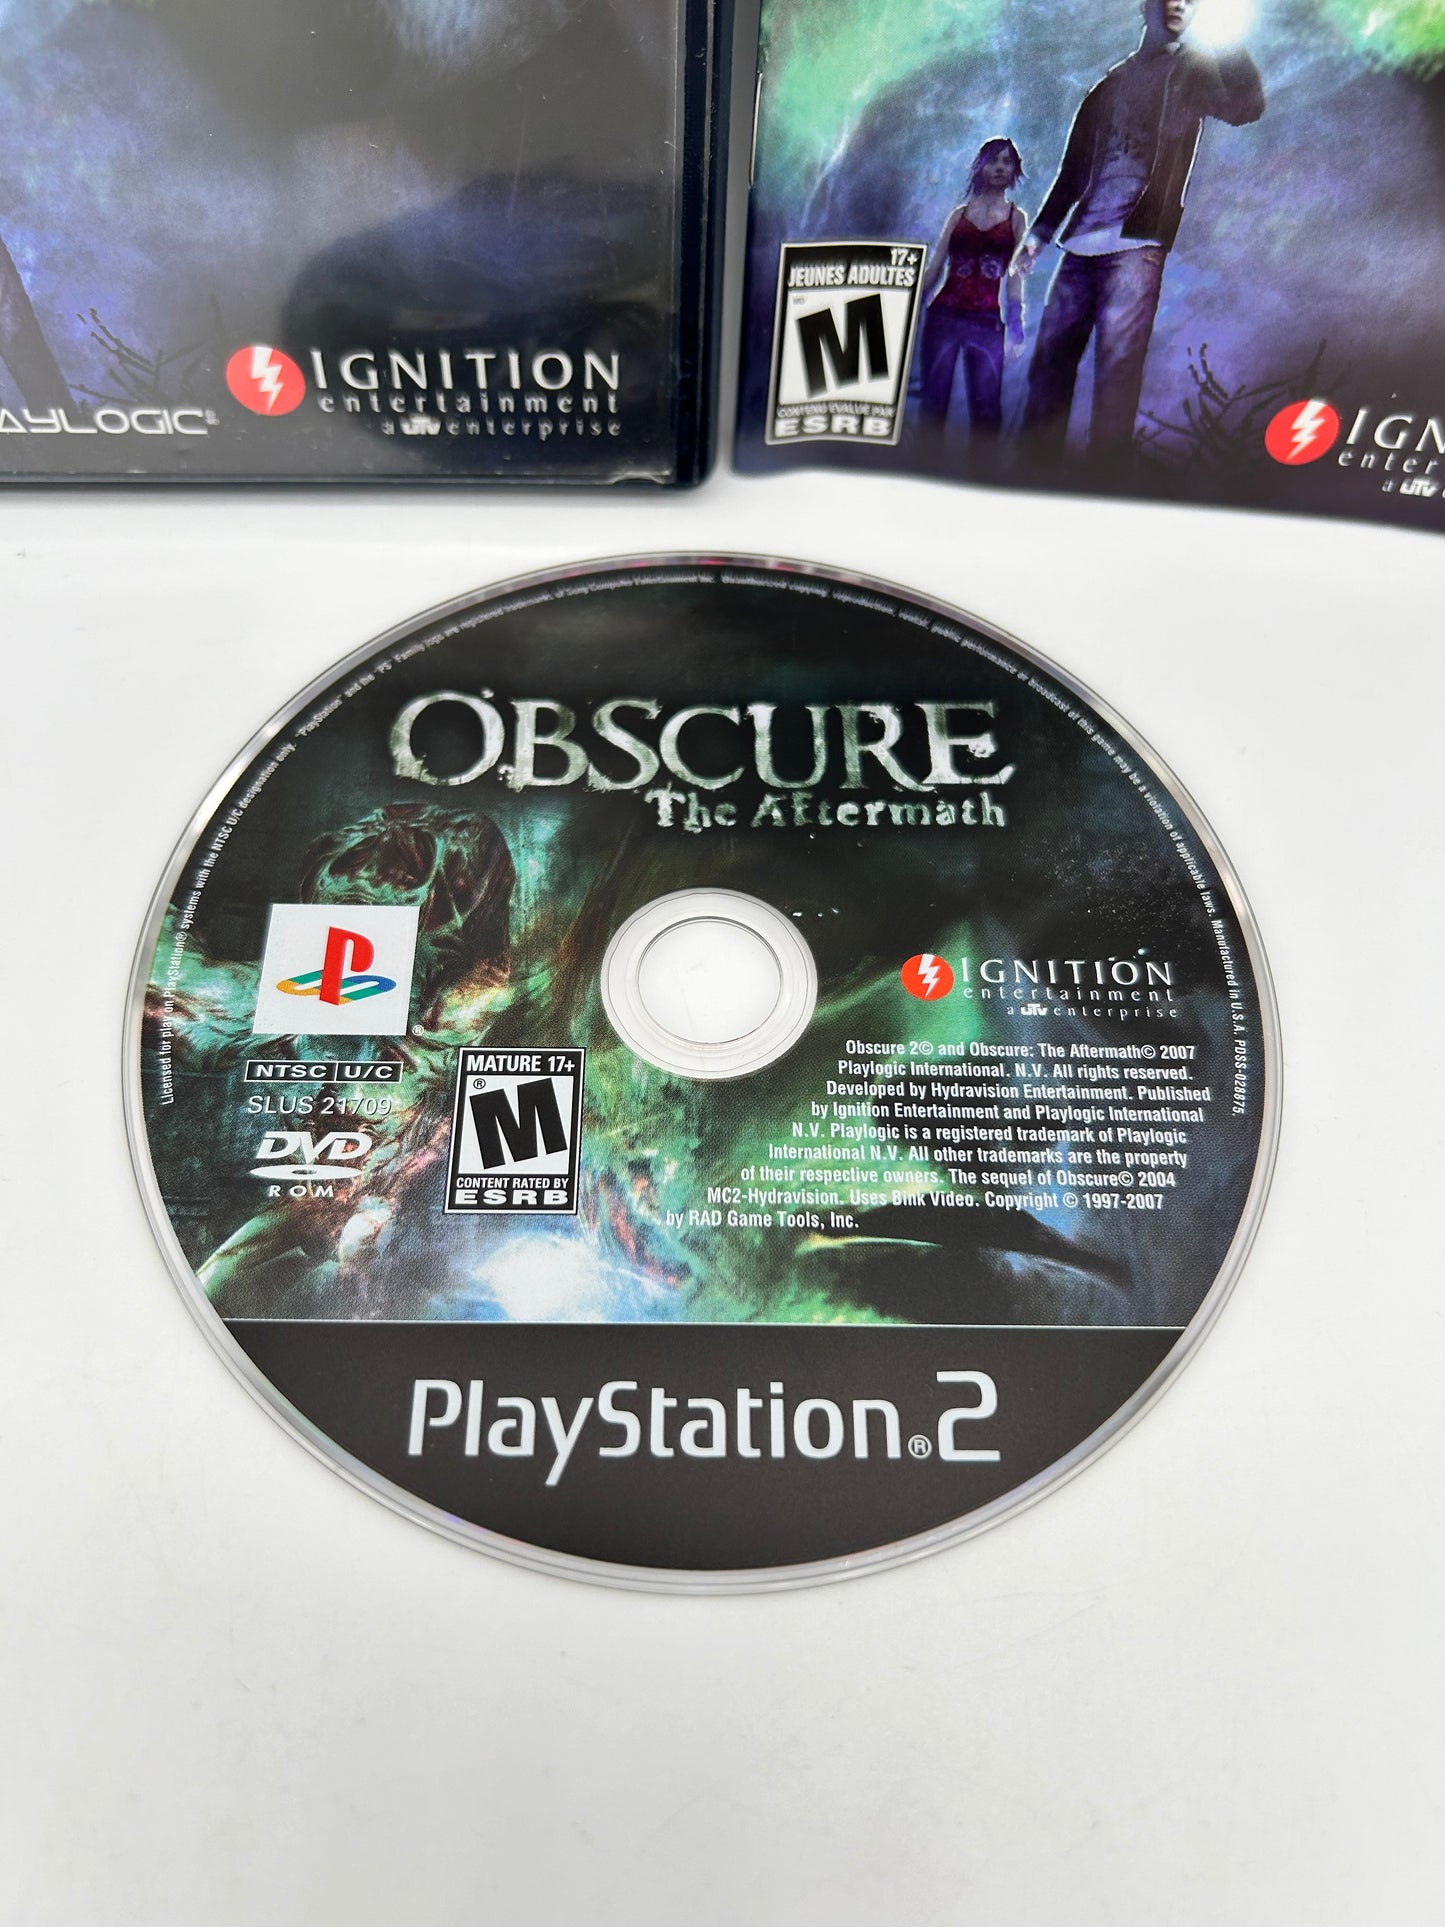 SONY PLAYSTATiON 2 [PS2] | OBSCURE THE AFTERMATH